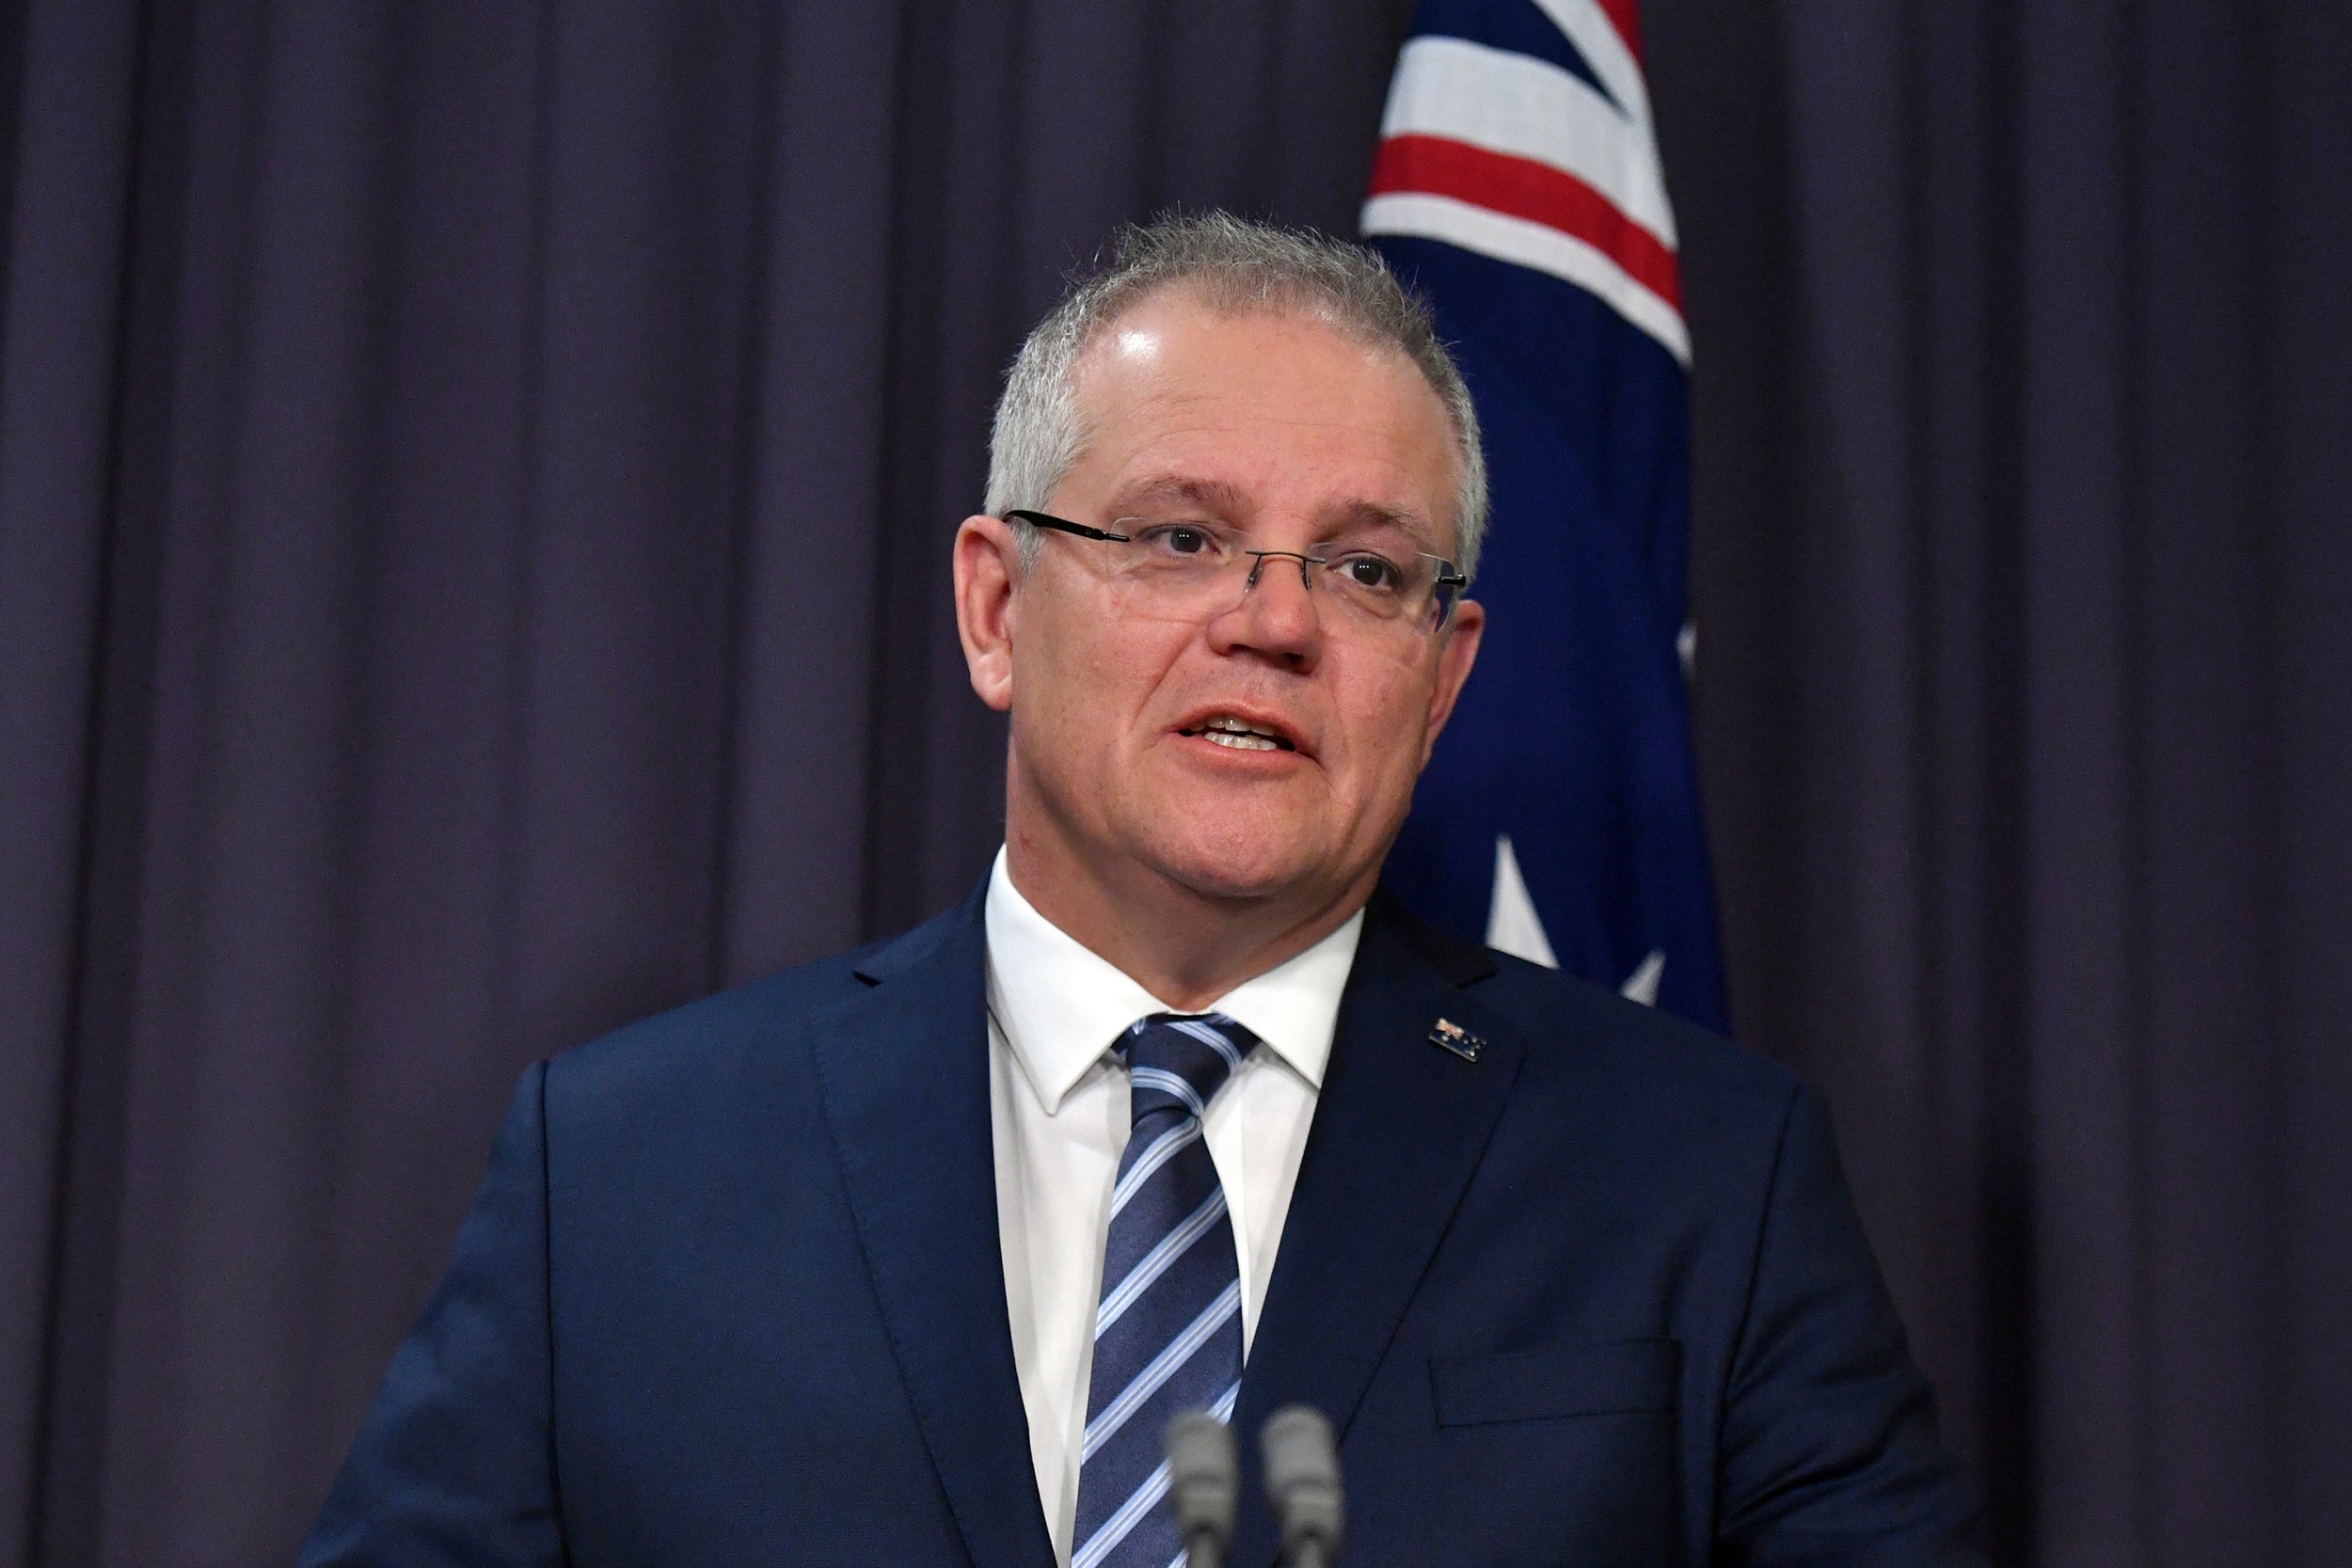 Scott Morrison speaks at a press conference in Canberra on Friday